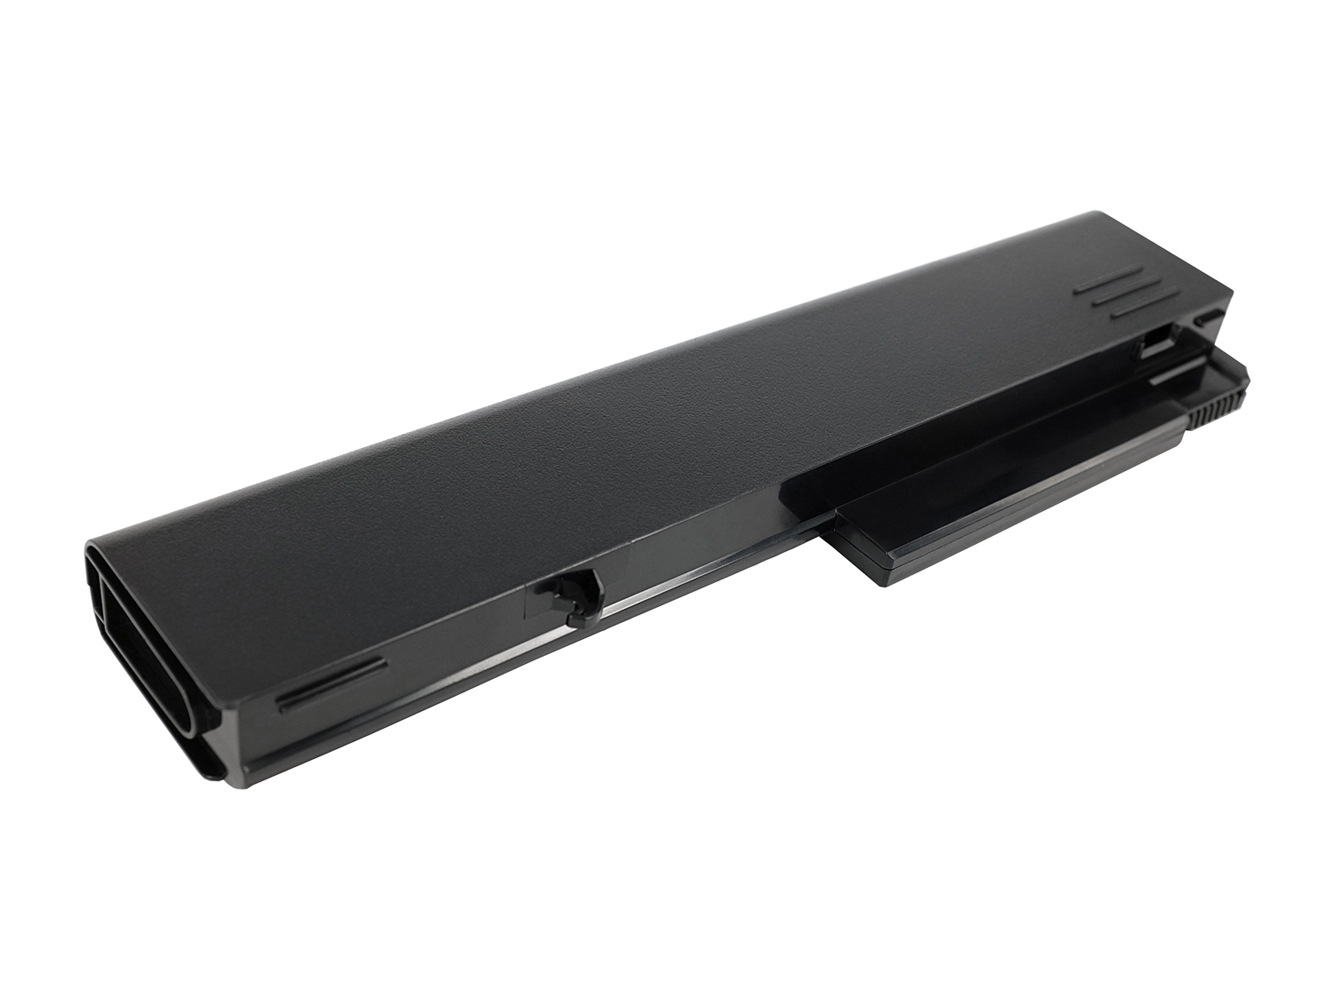 Replacement for HP COMPAQ Business Notebook NX5100, HP COMPAQ Business Notebook 6000, NC6105, NC6000, NX6100, NX6300 Series Laptop Battery